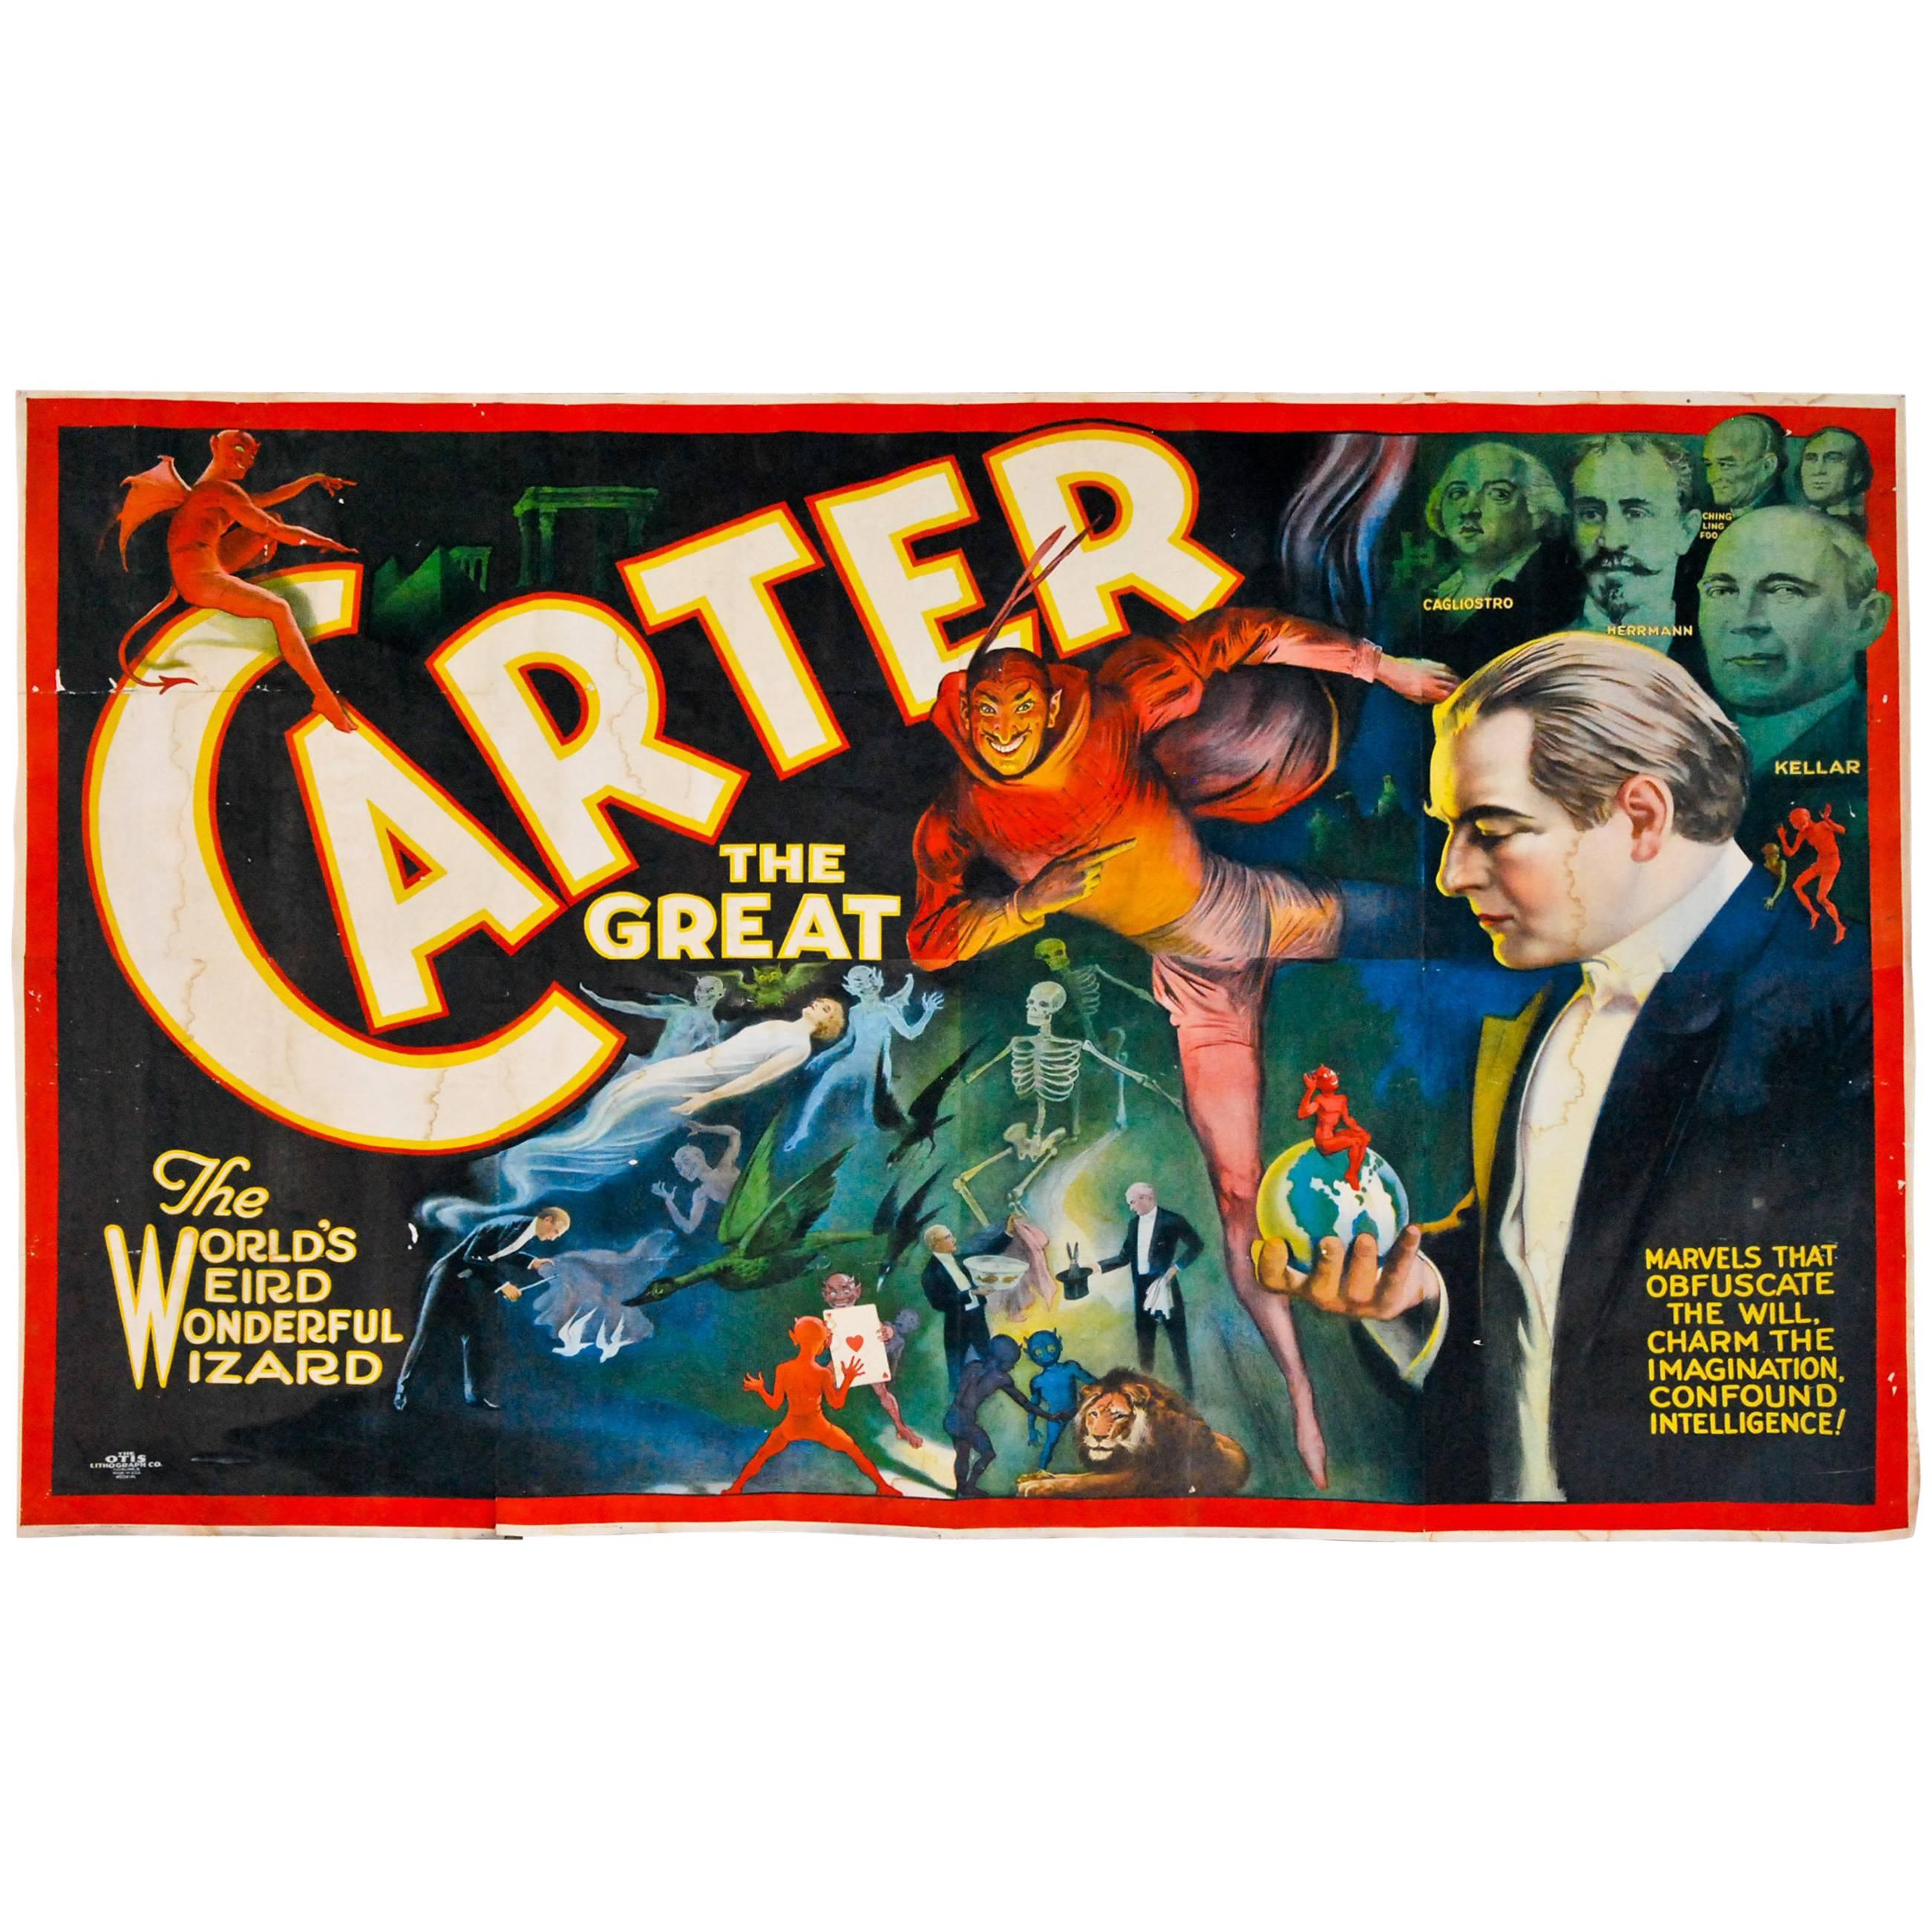 1915 ‘Carter the Great’ Banner by Otis Lithograph, Cleveland